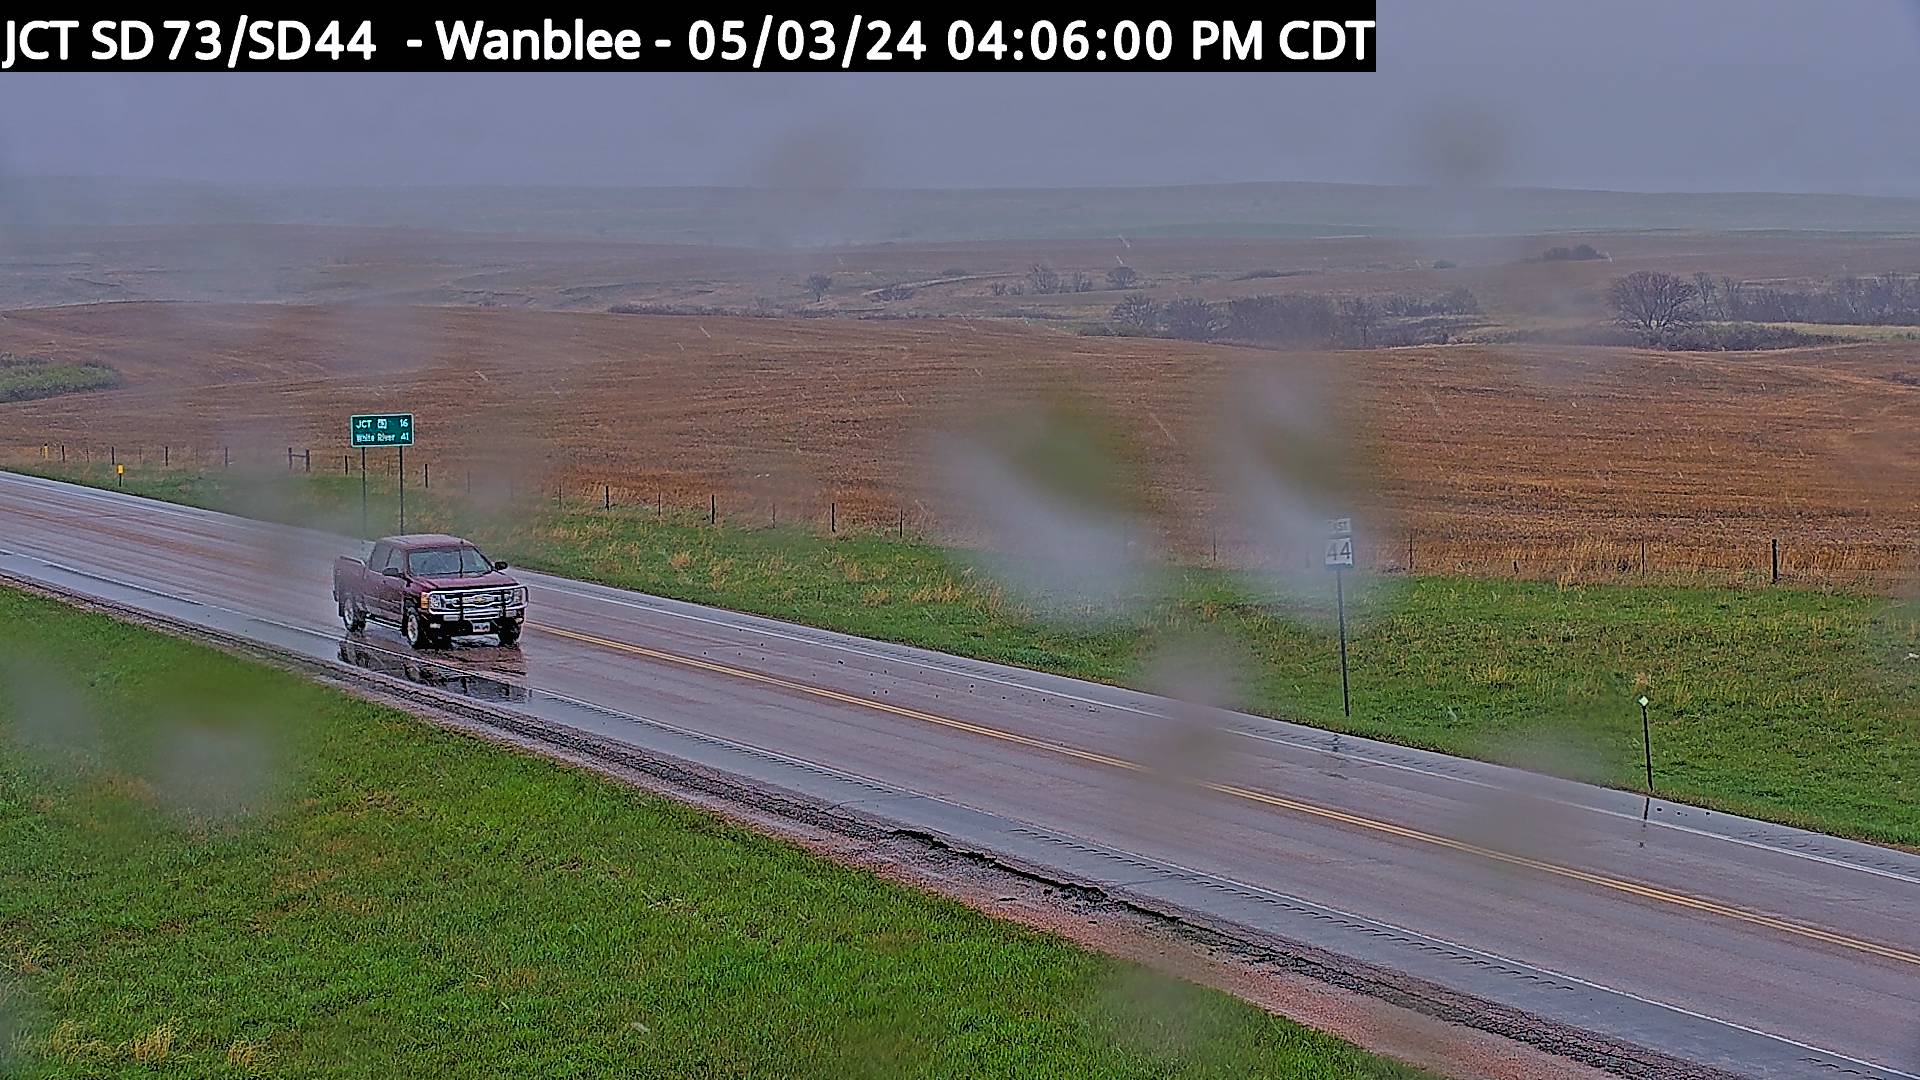 7 miles east of Wanblee at SD-44 & SD-73 - East Traffic Camera